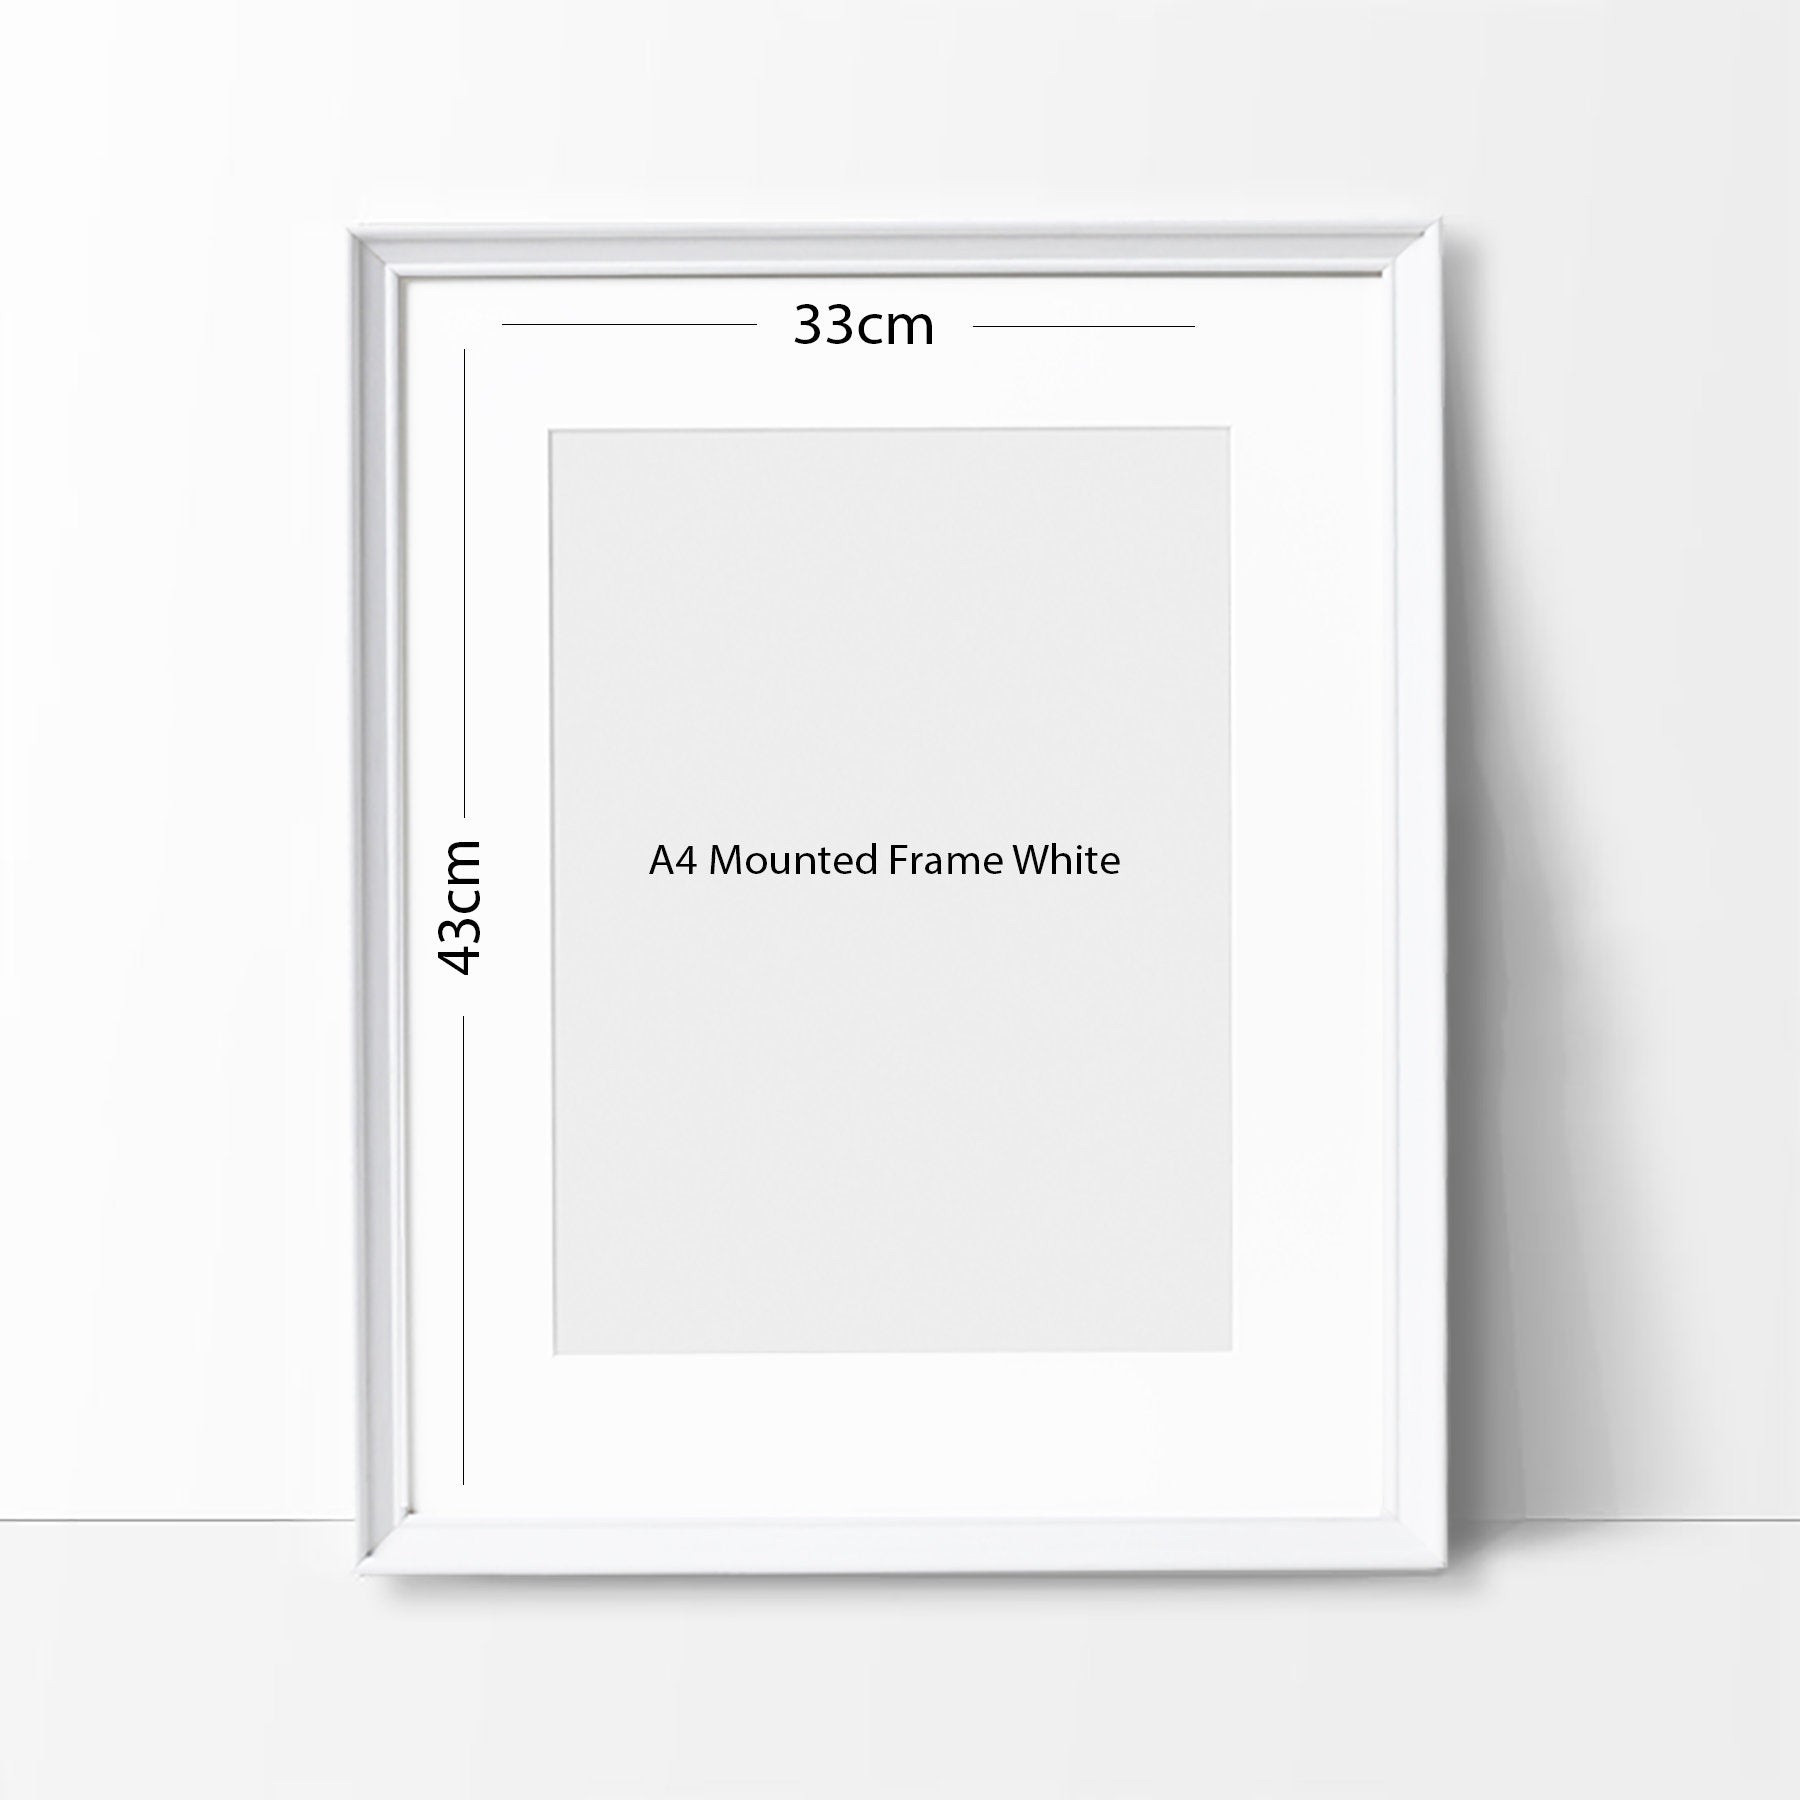 Andy Murray Minimalist Art Print Poster Gift Idea For Him | Football Print | Tennis | Gift for